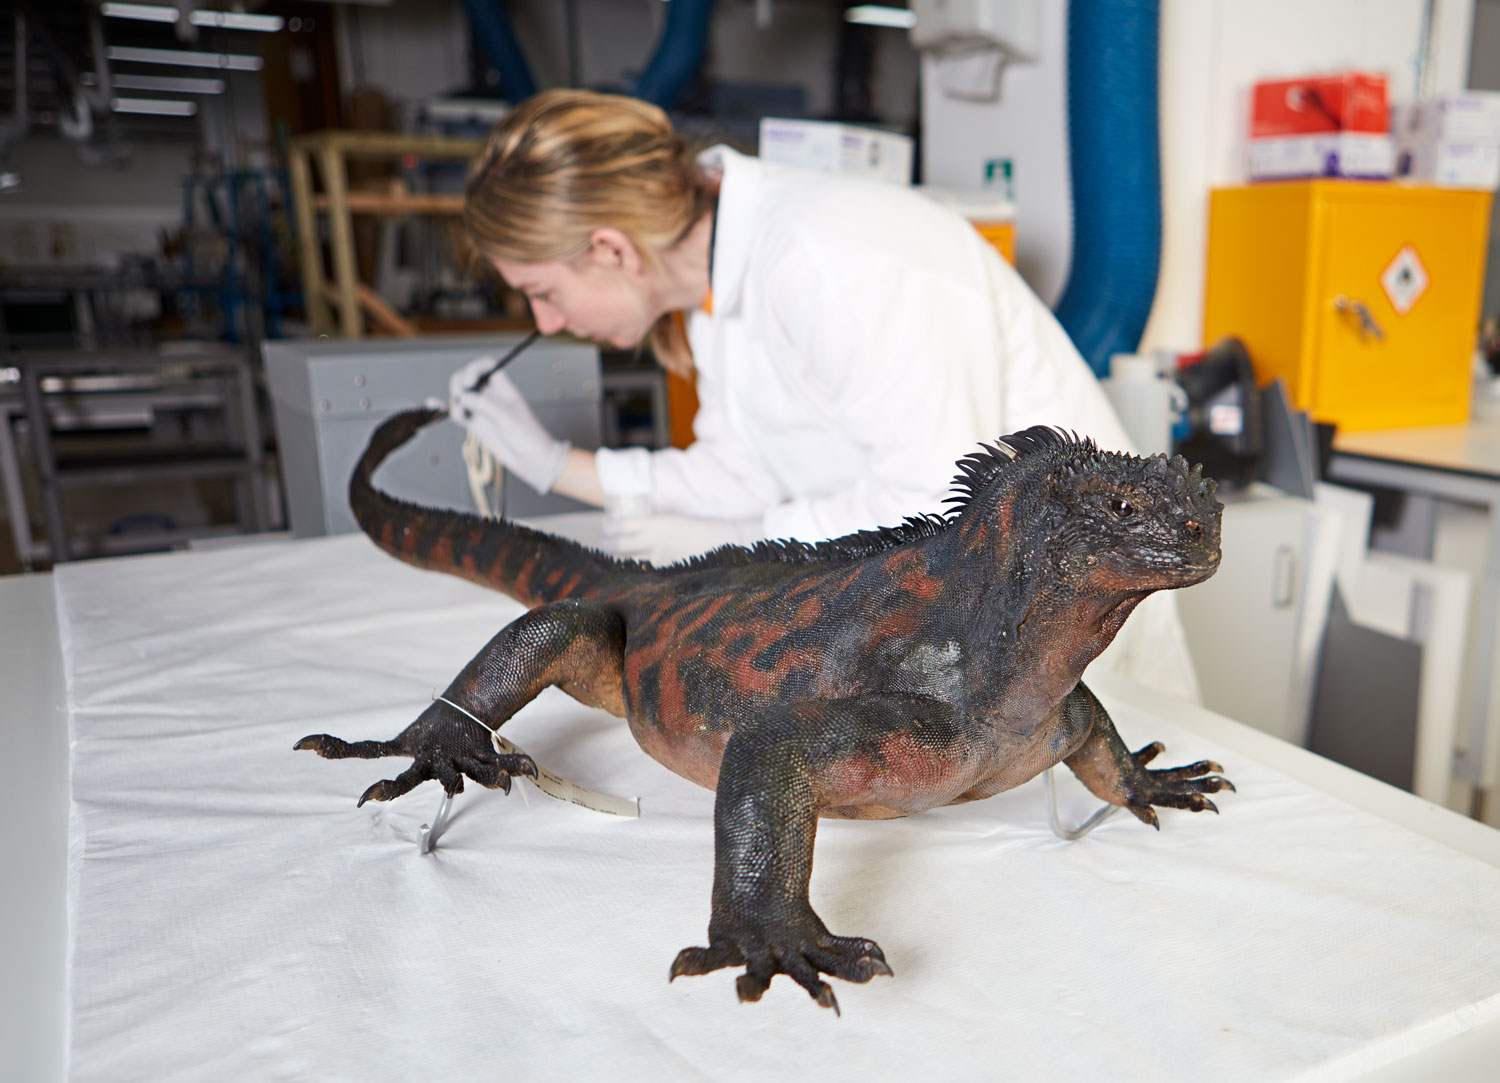 The Galapagos marine iguana is displayed in the Natural History Museum exhibit as part of the Fantastic Beasts: The Wonder of Nature exhibit.